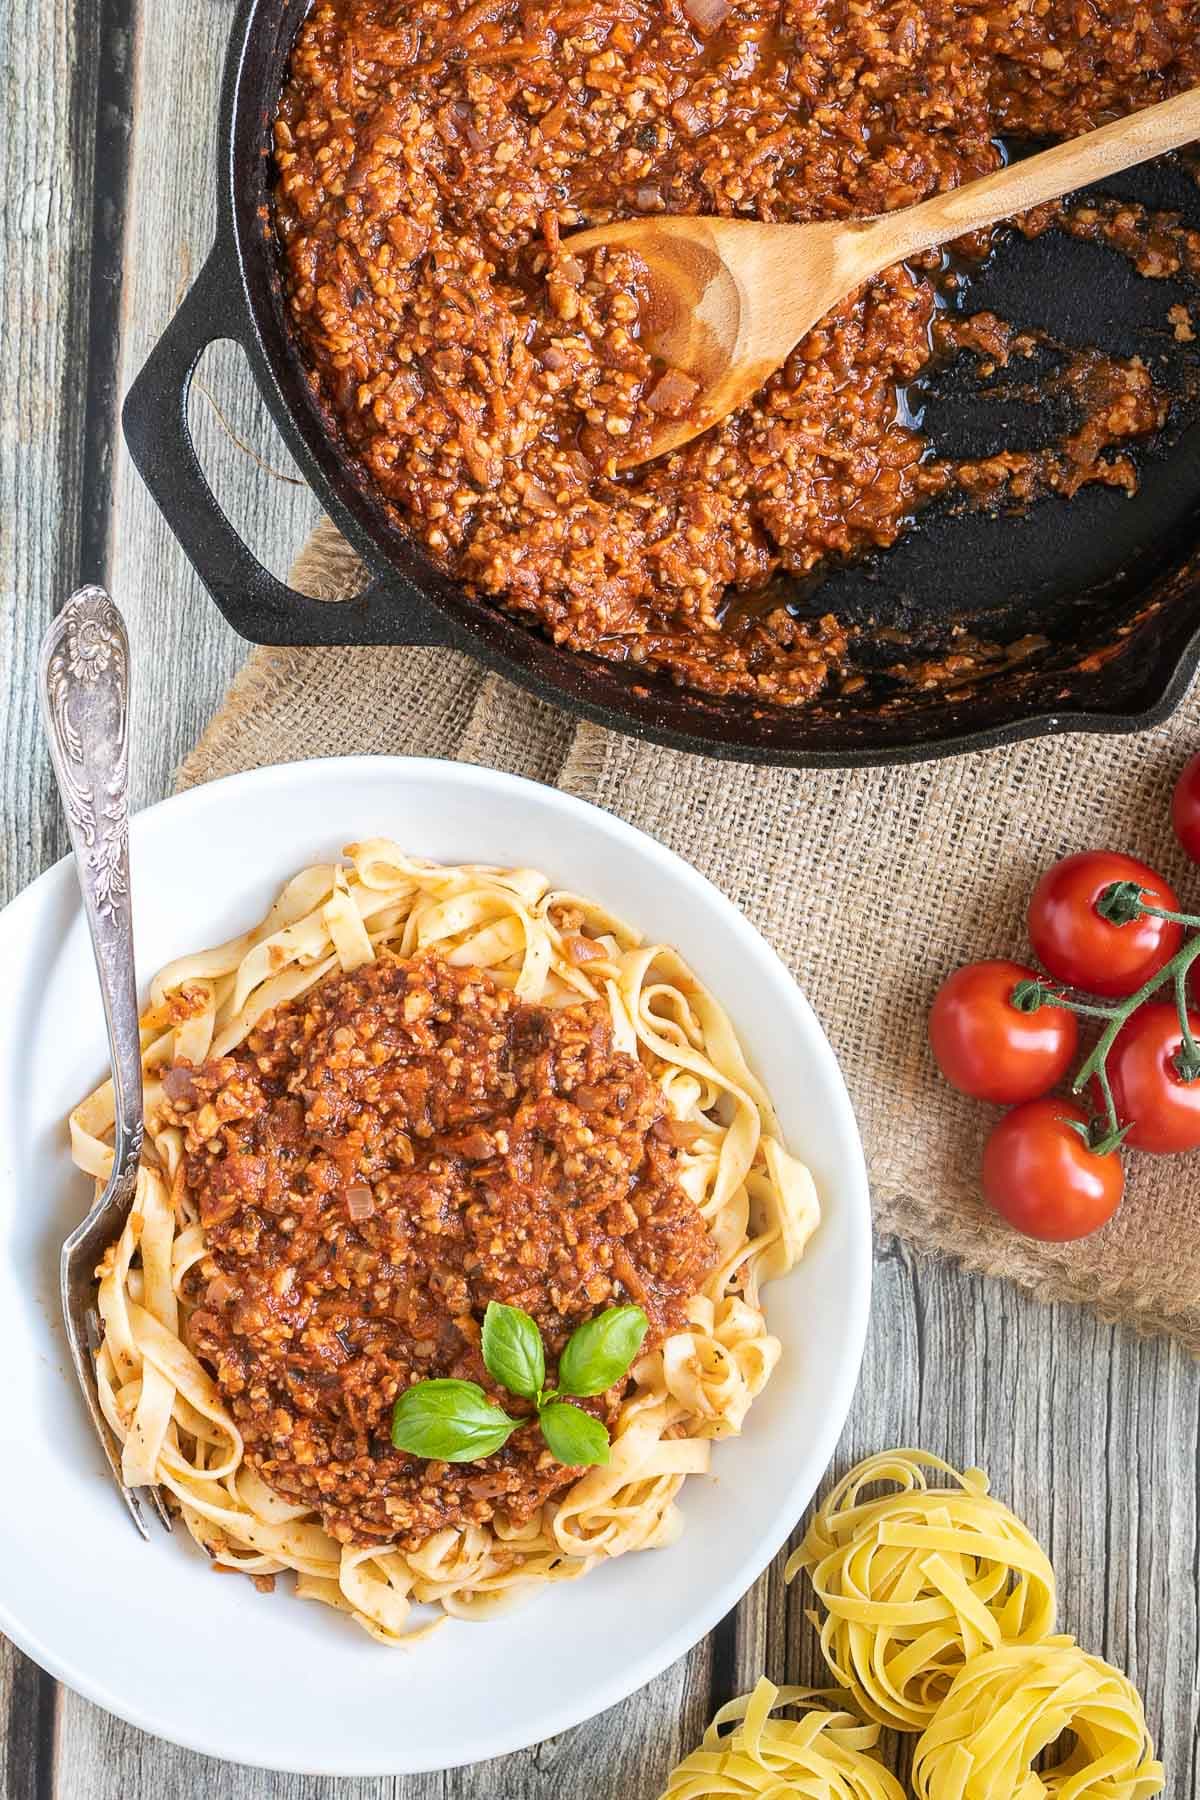 A white bowl of tagliatelle pasta topped with meat-like crumbles in bolognese sauce. Leftover bolognese in the cast iron skillet is right next to it.